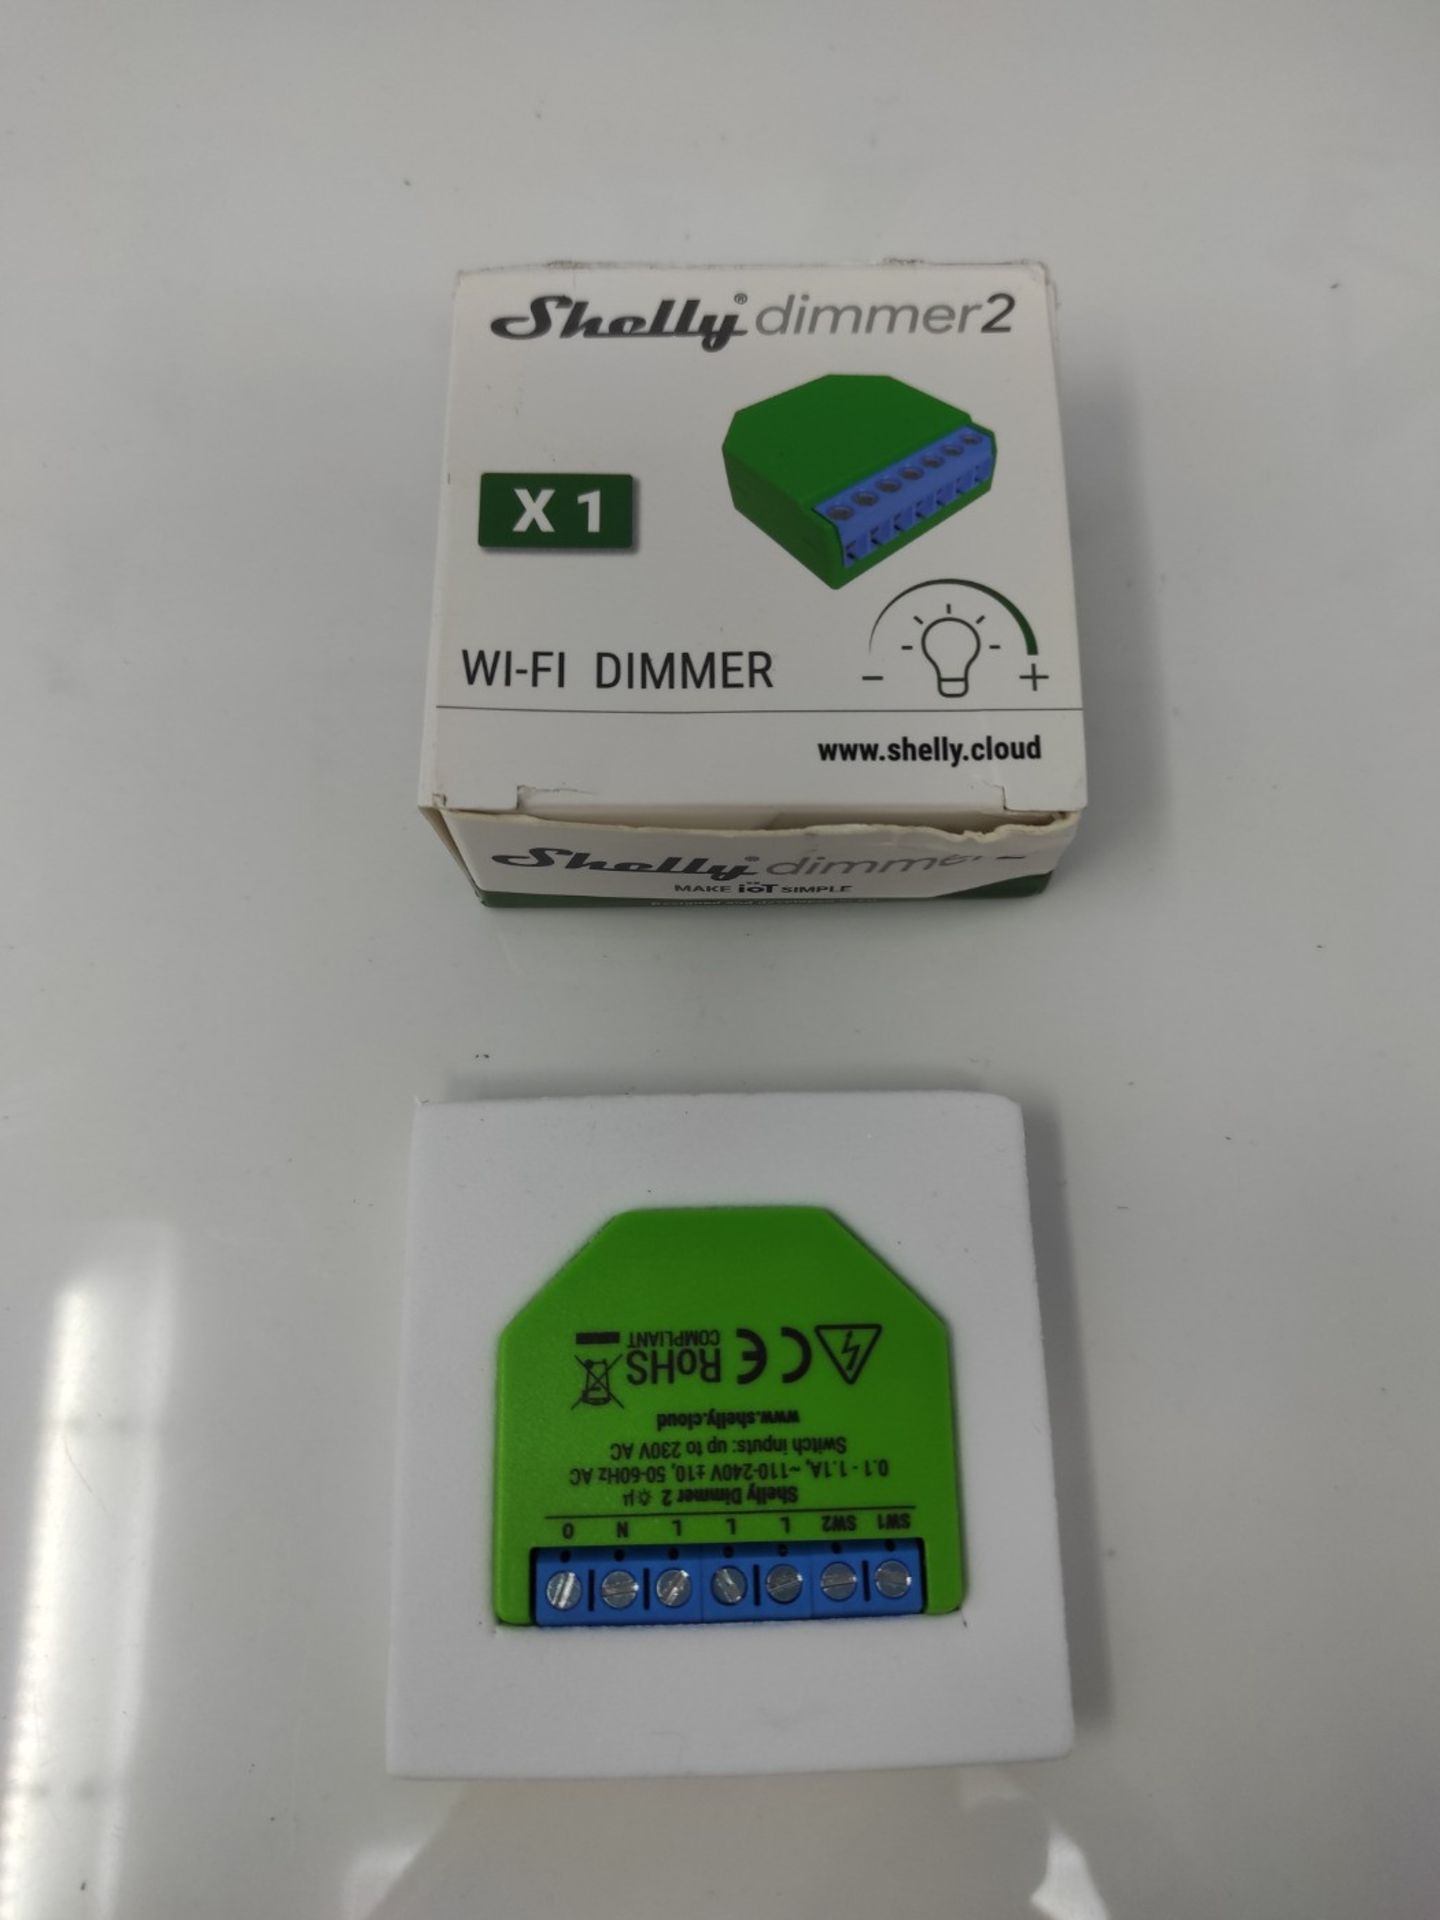 Shelly - Dimmer 2  Version 2021  WiFi dimmer suitable for Smart Home, Alexa & Go - Image 2 of 2